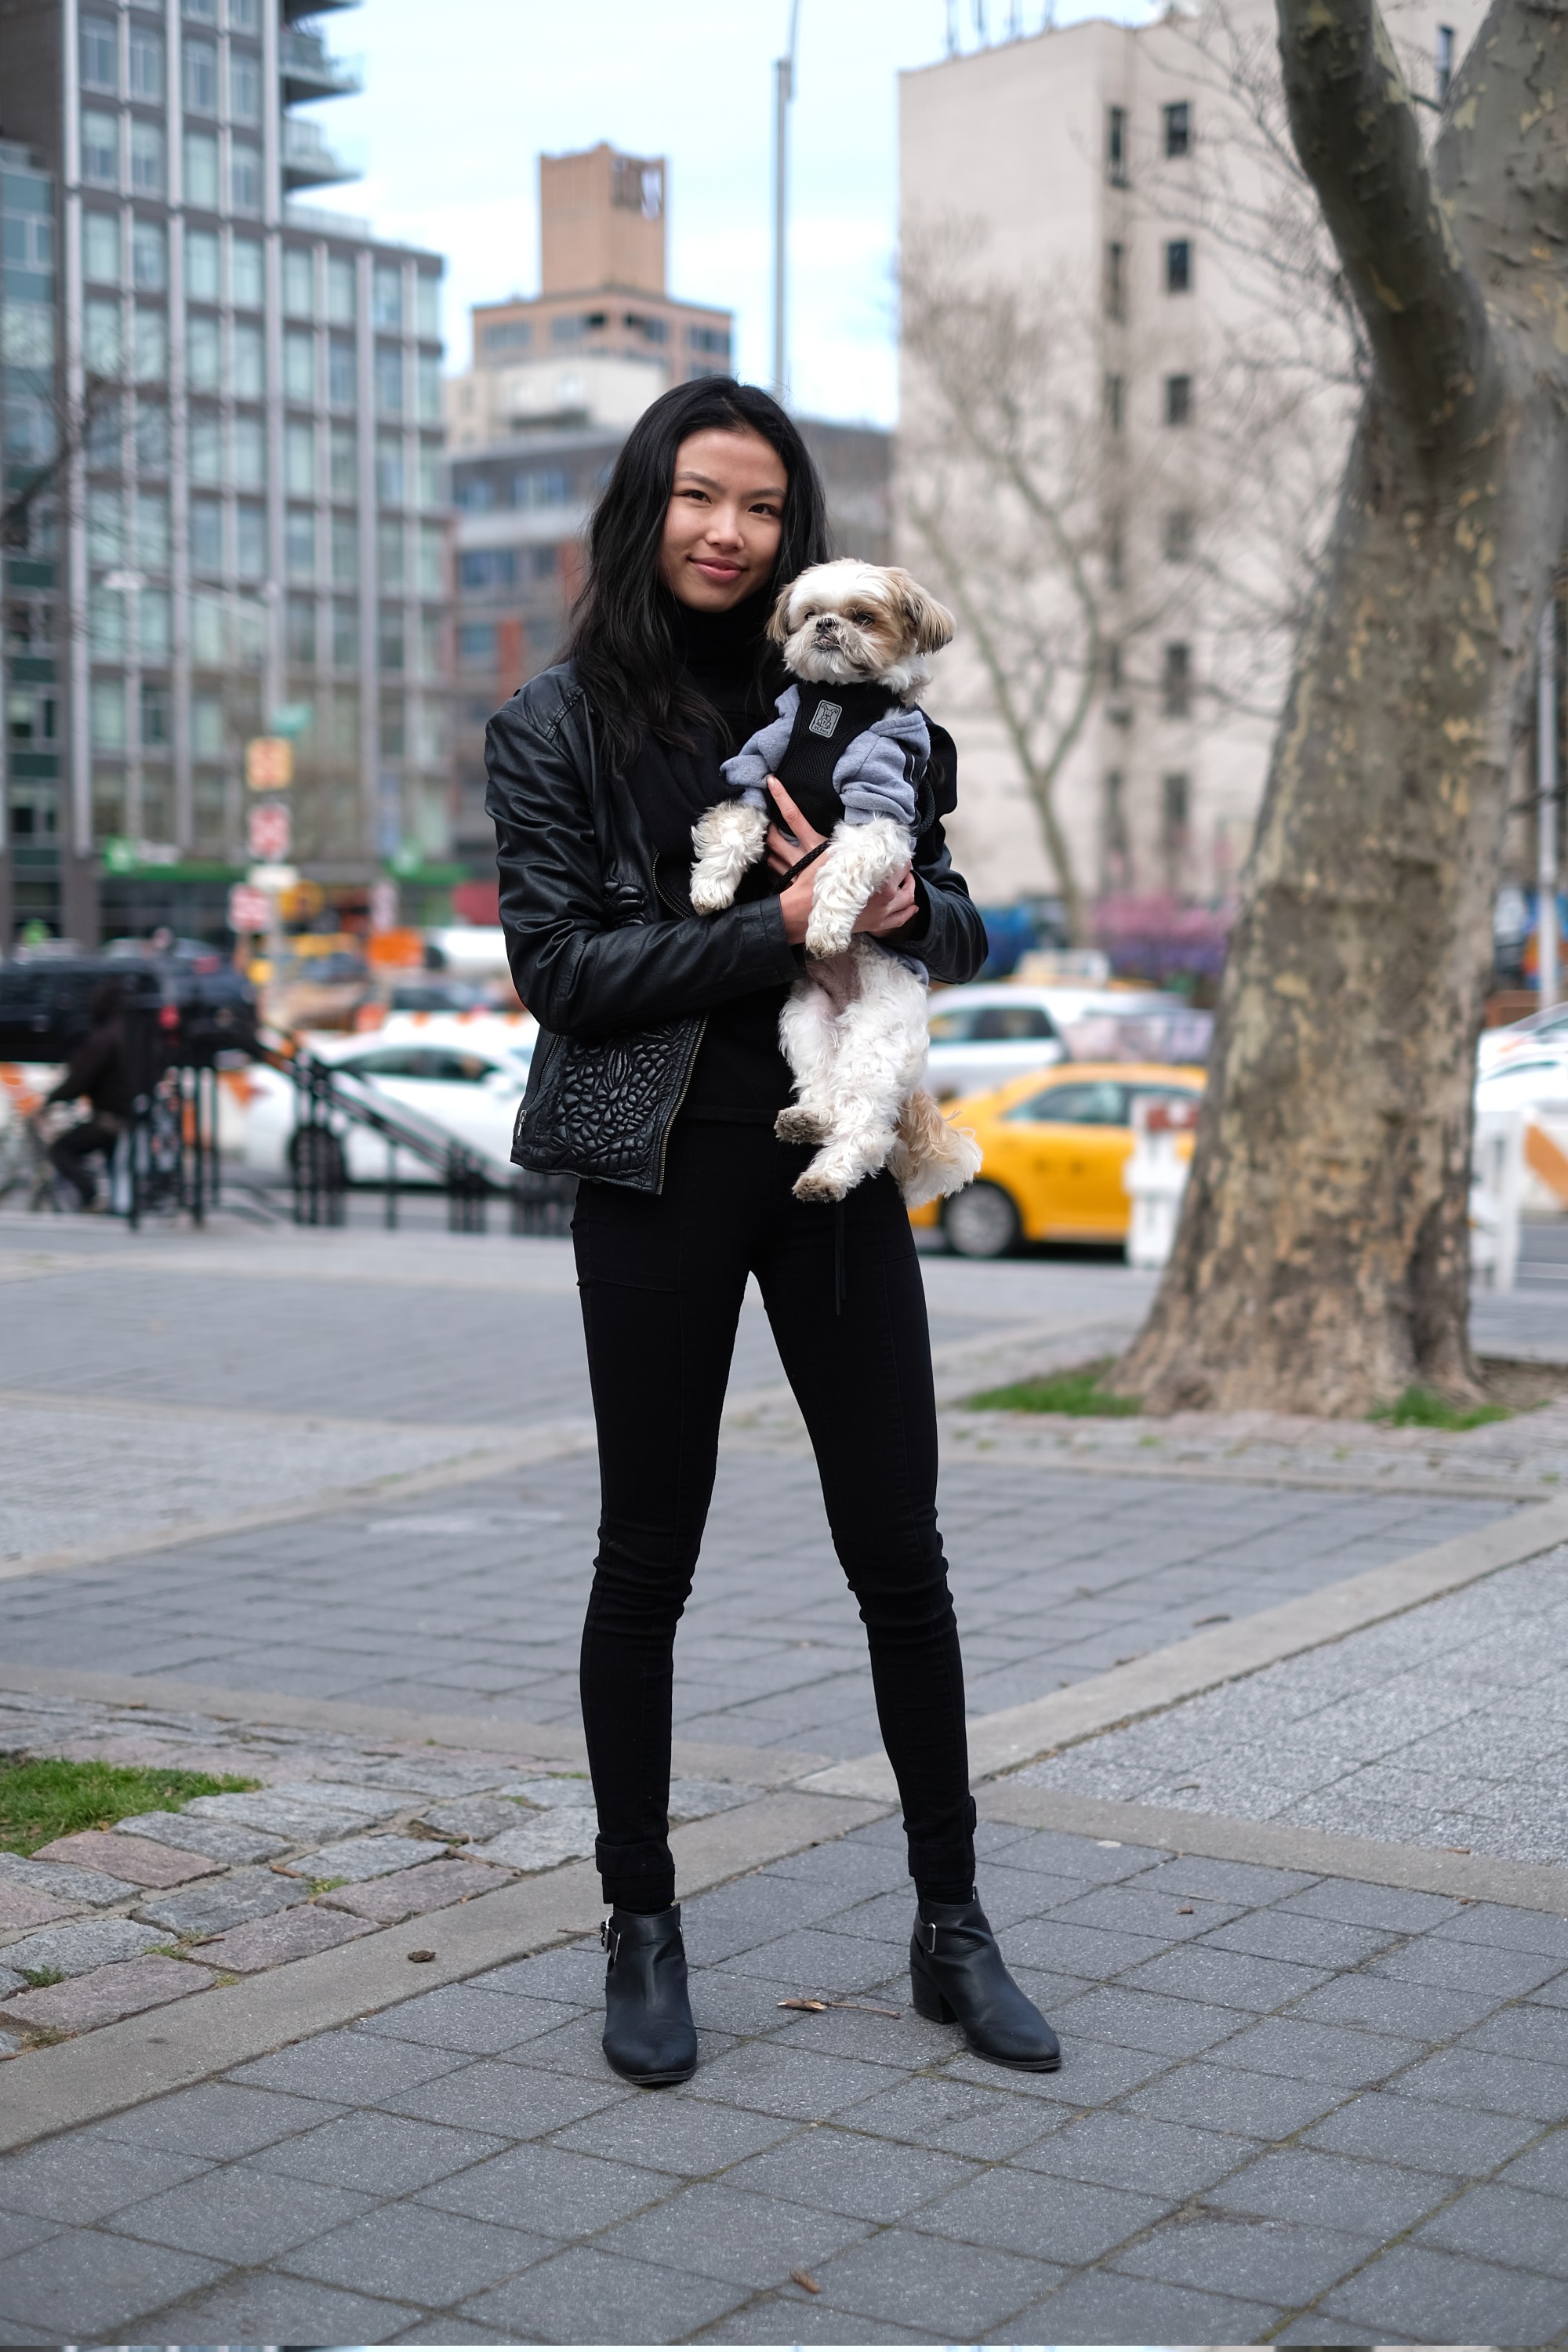 model in black outfit holding small dog